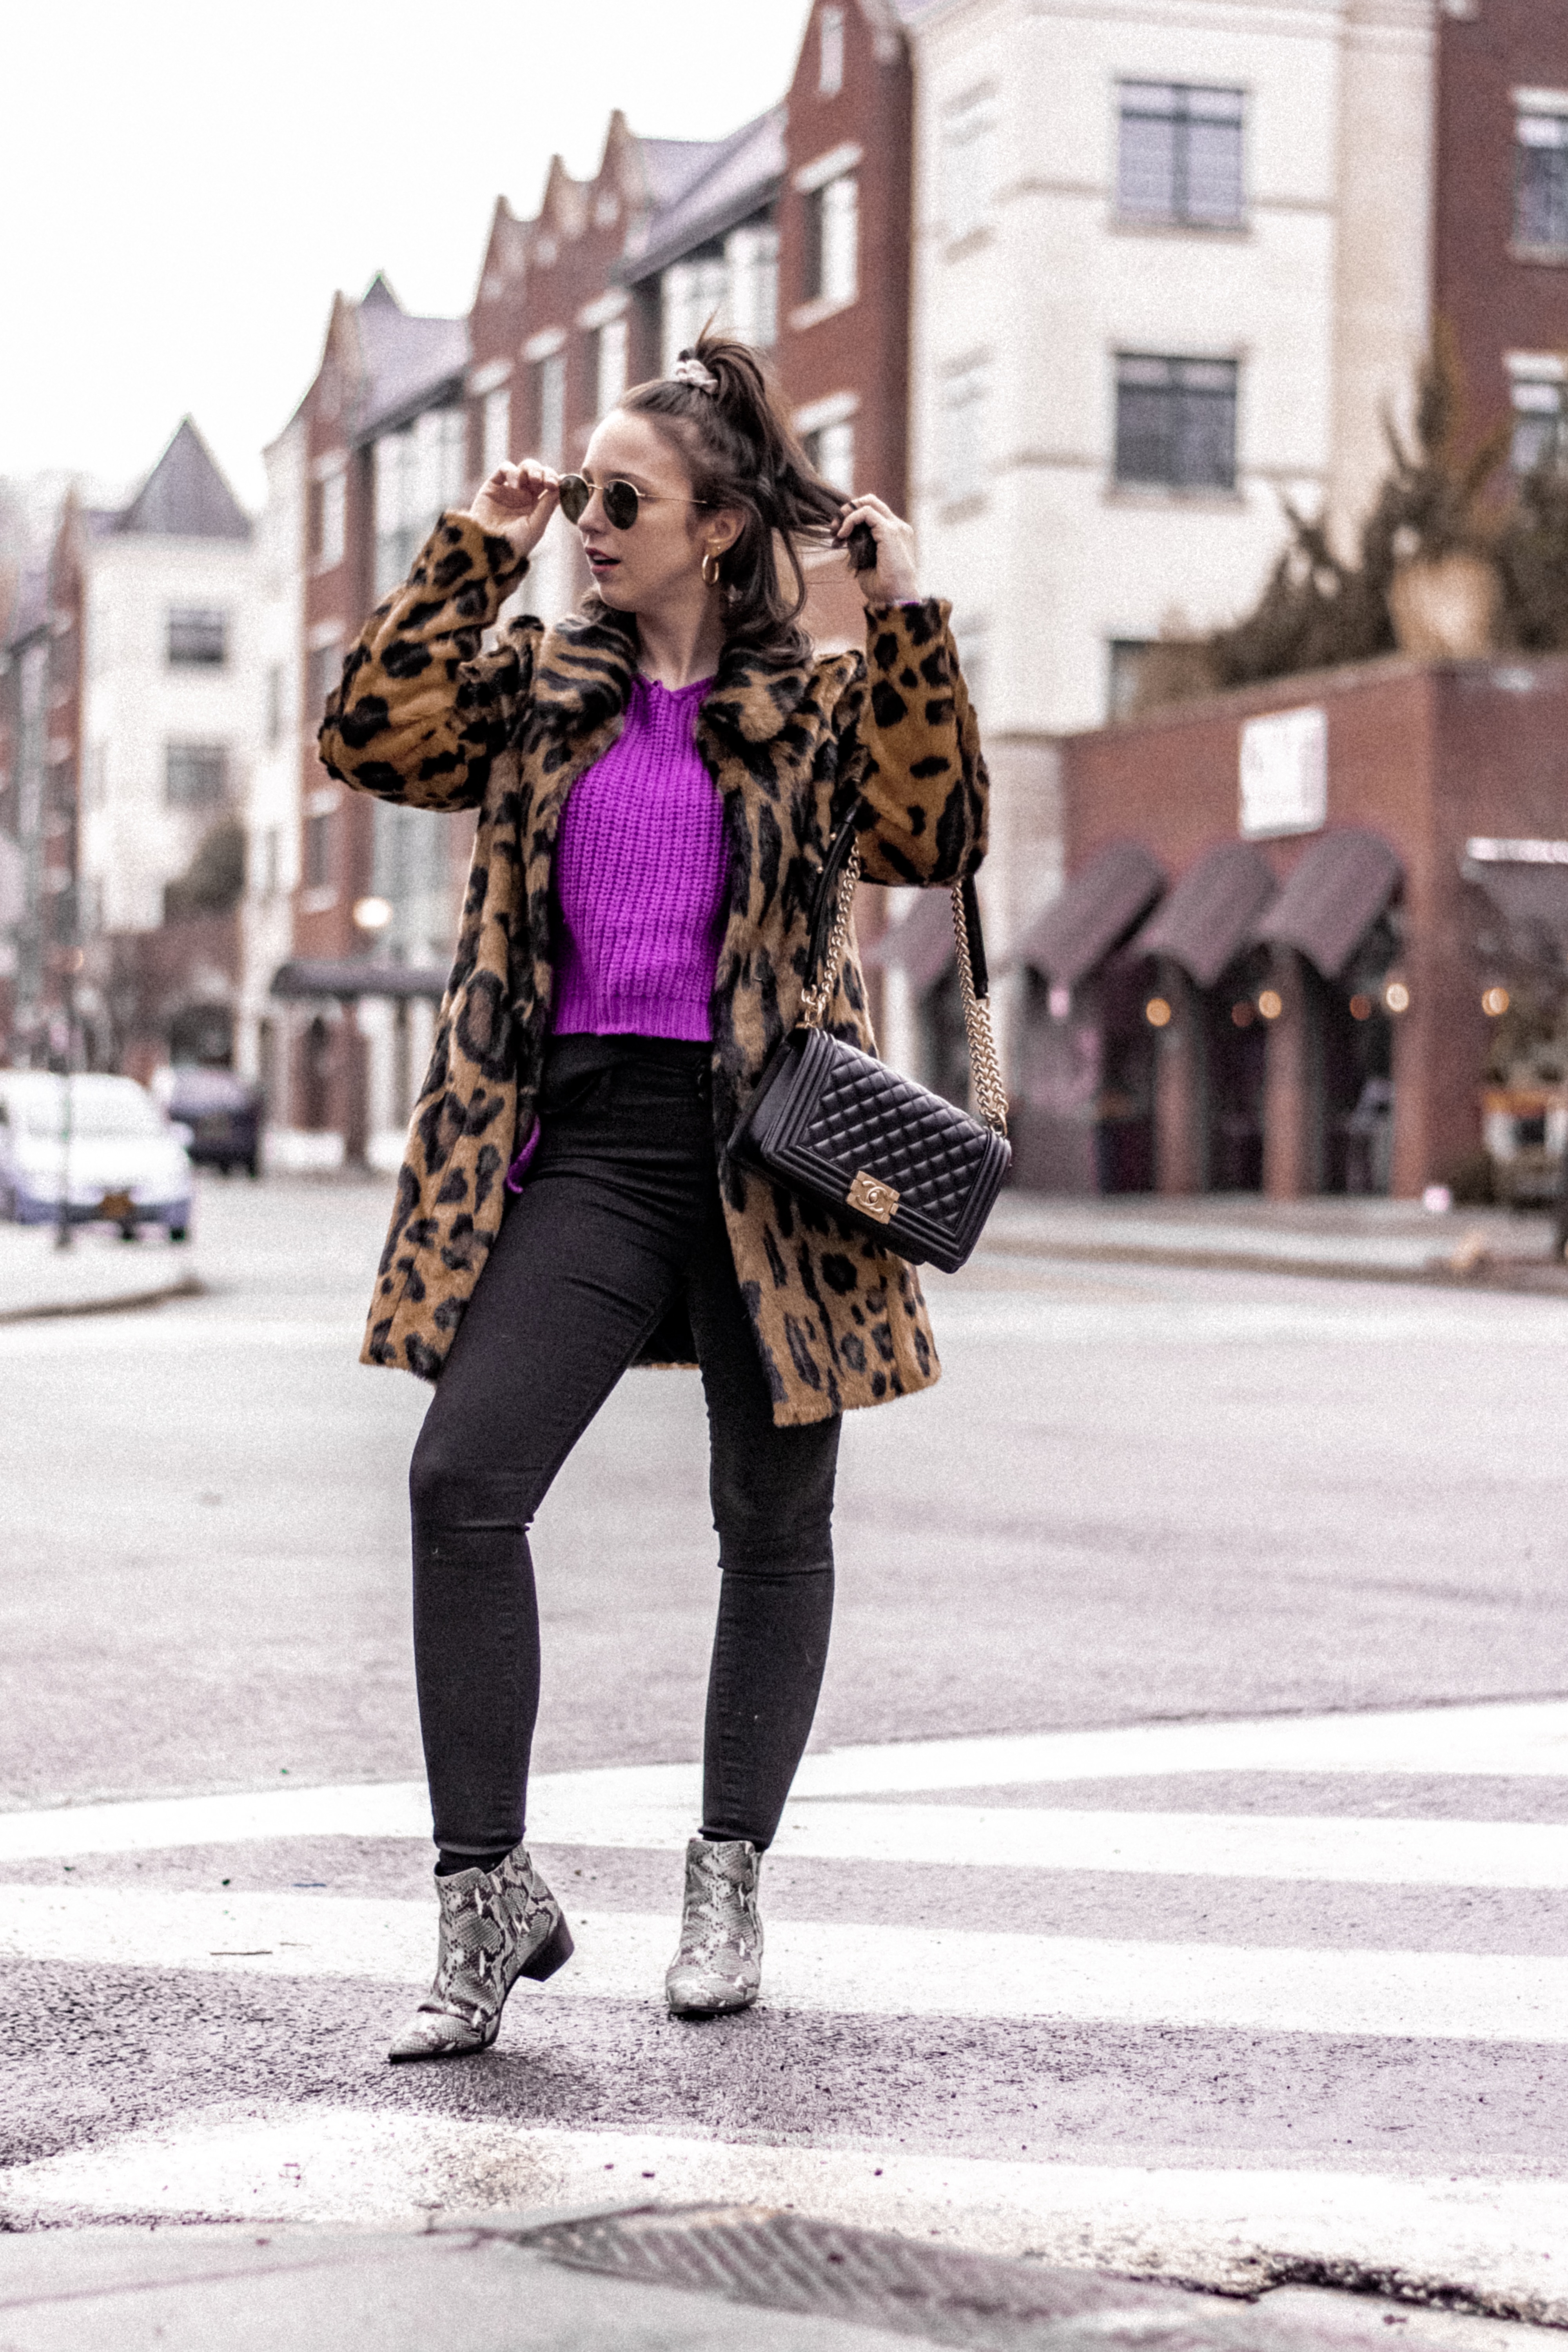 Fashion Accessories Under $100 to Grab in 2019- #accessories #fashion #fashiontrends #trends #hair #beauty #style #blogger #shopping #outfit #winteroutfit #shopthepost #leopardcoat #chanelbag #neon #snakeskin 